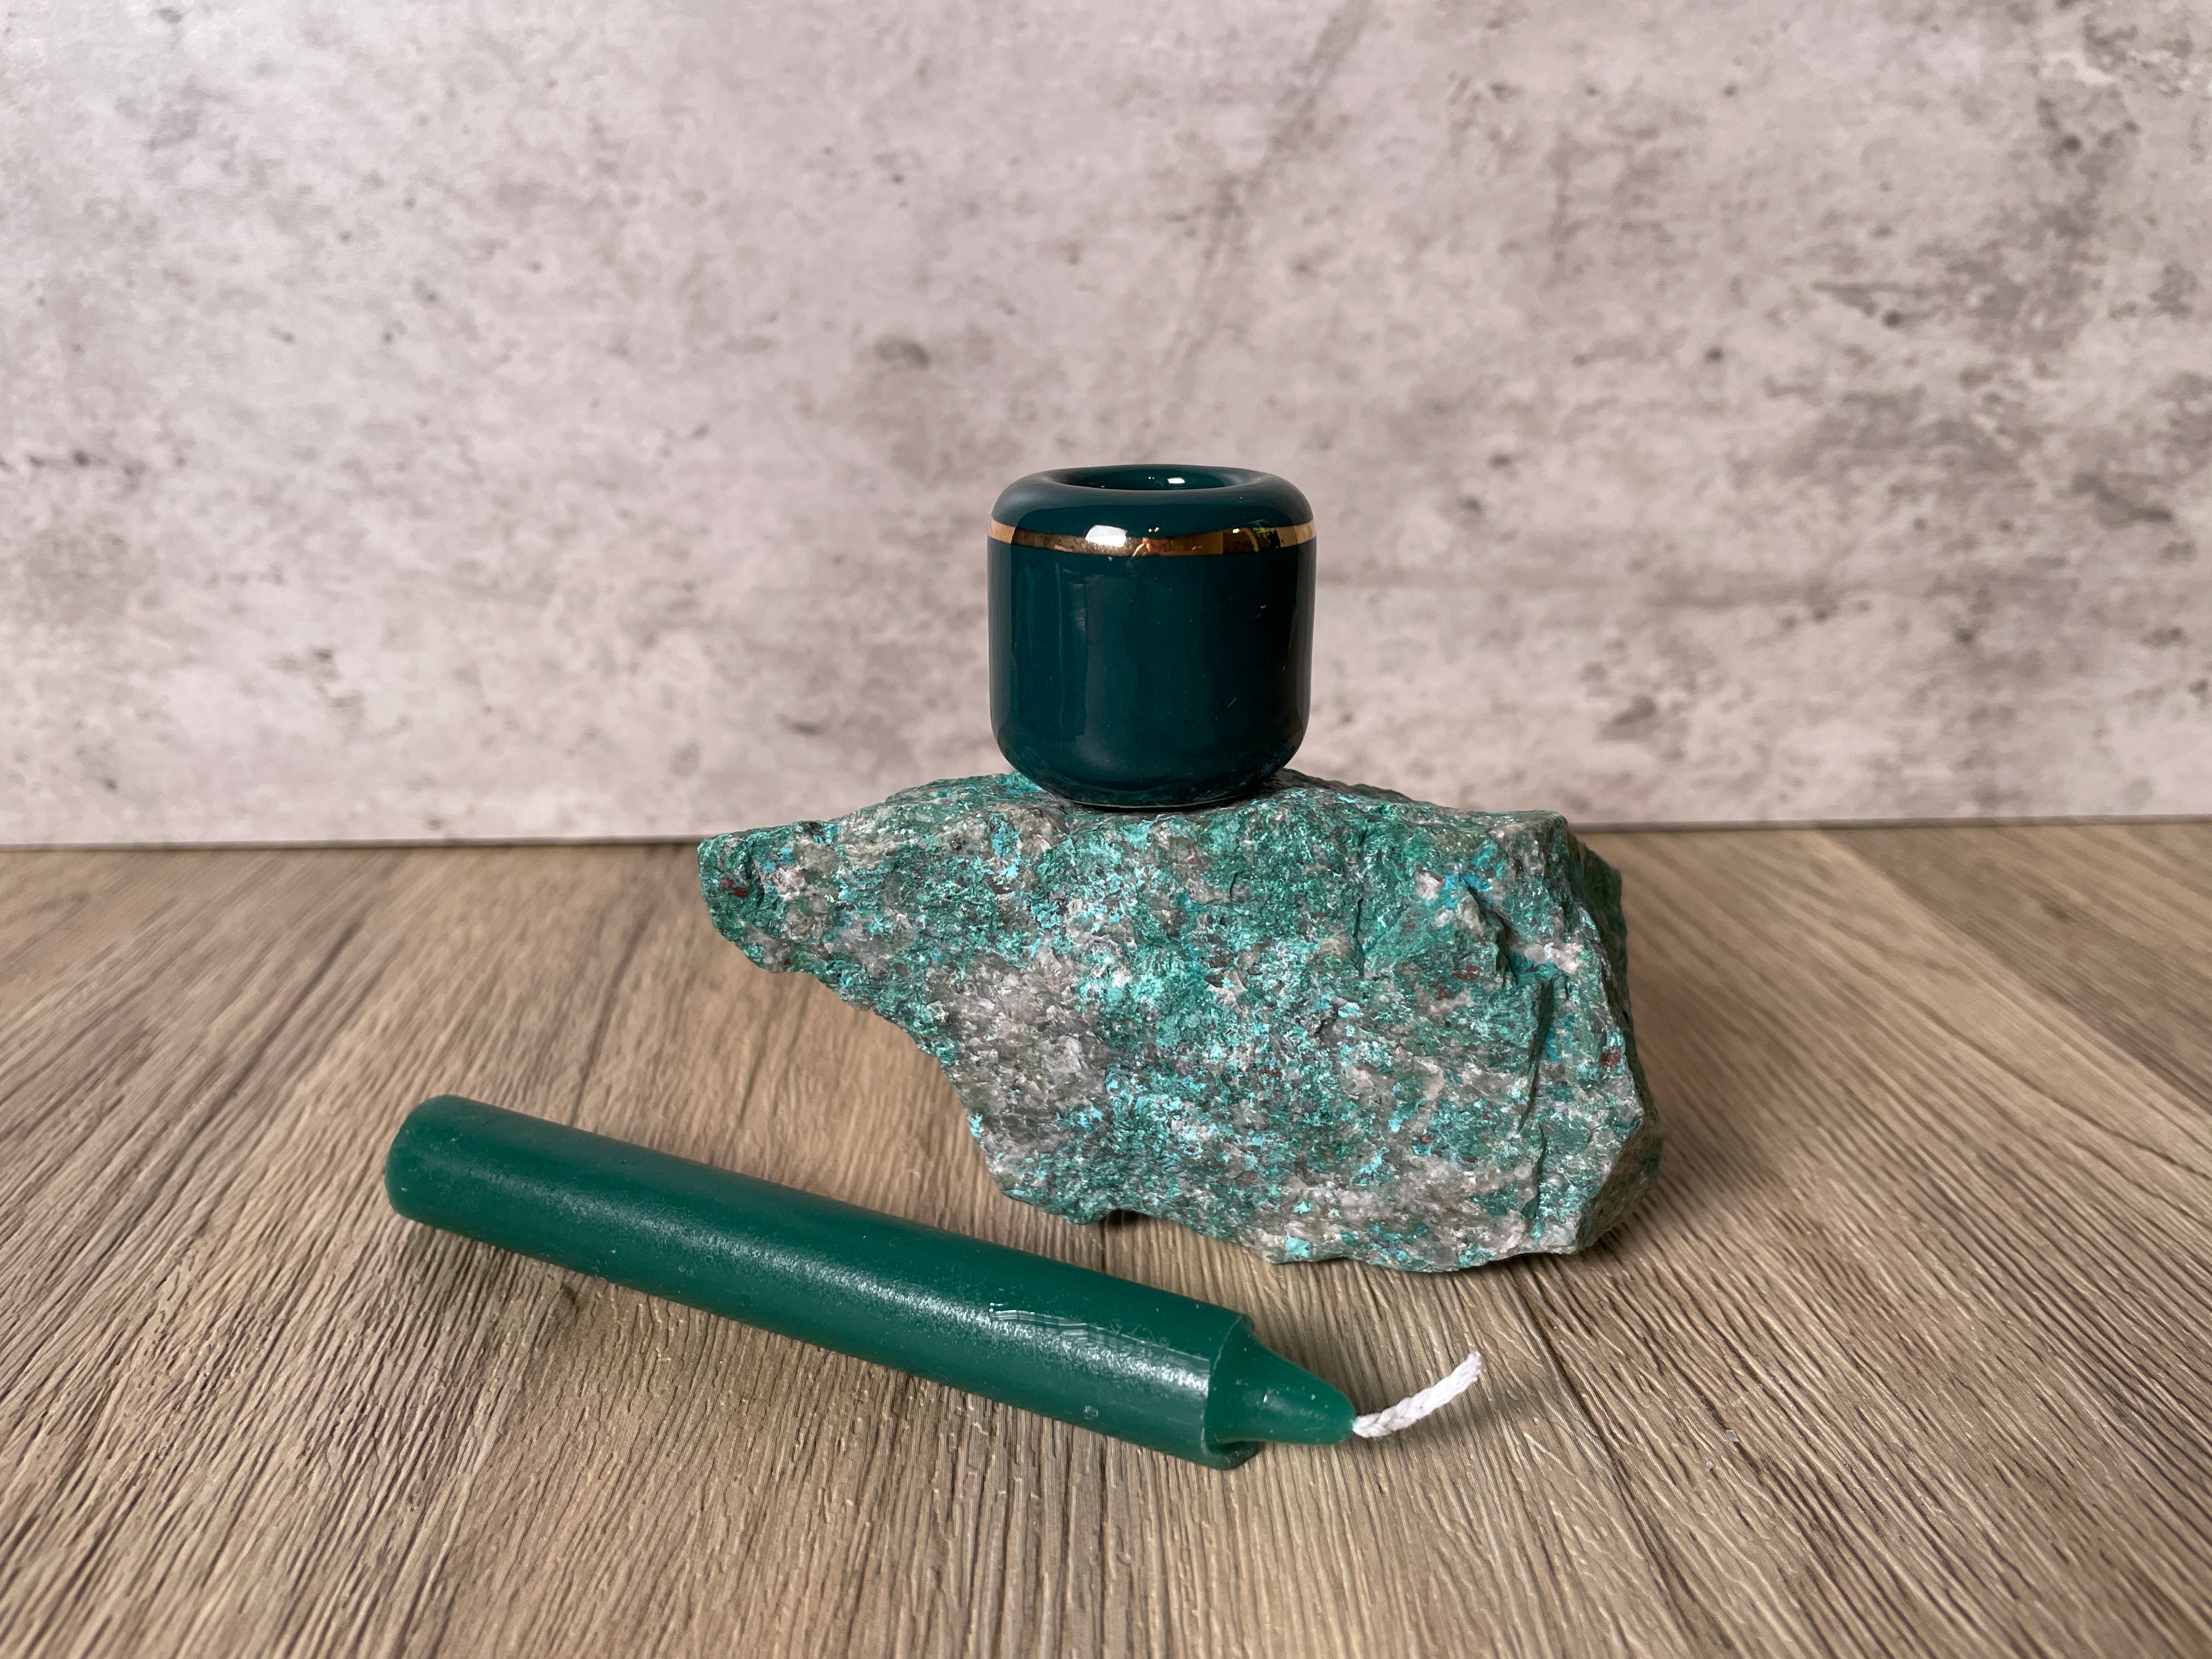 Buy Online Latest and Unique Green Chime Candle Holder - Ceramic with Gold Band | Shop Best Spiritual Items - The Mystical Ritual